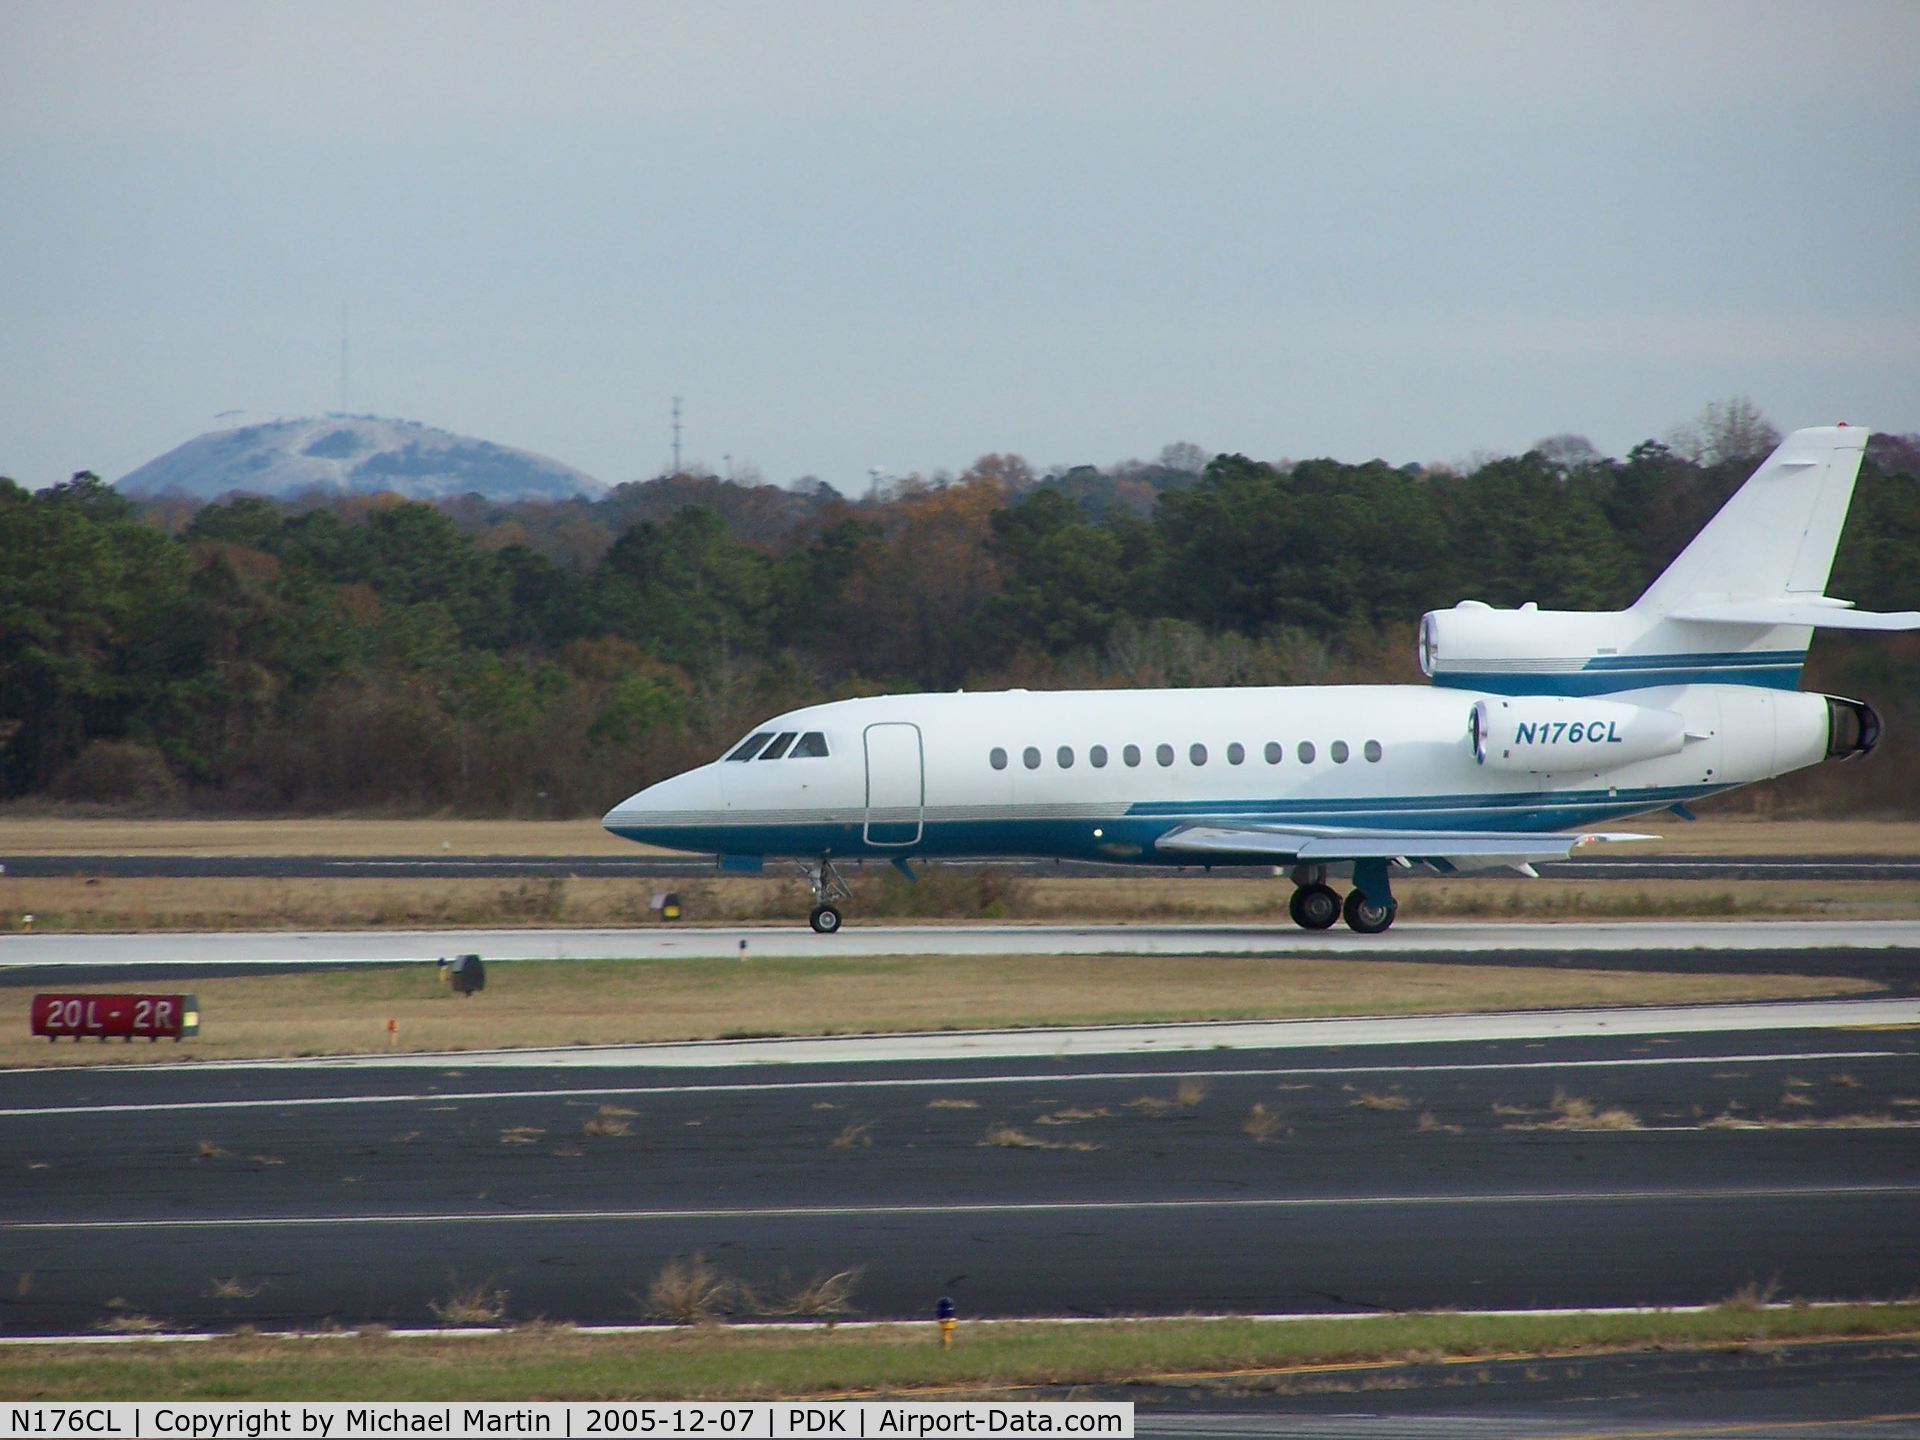 N176CL, 2002 Dassault Falcon 900EX C/N 110, Arriving PDK on 2R with Stone Mountain in the distance.